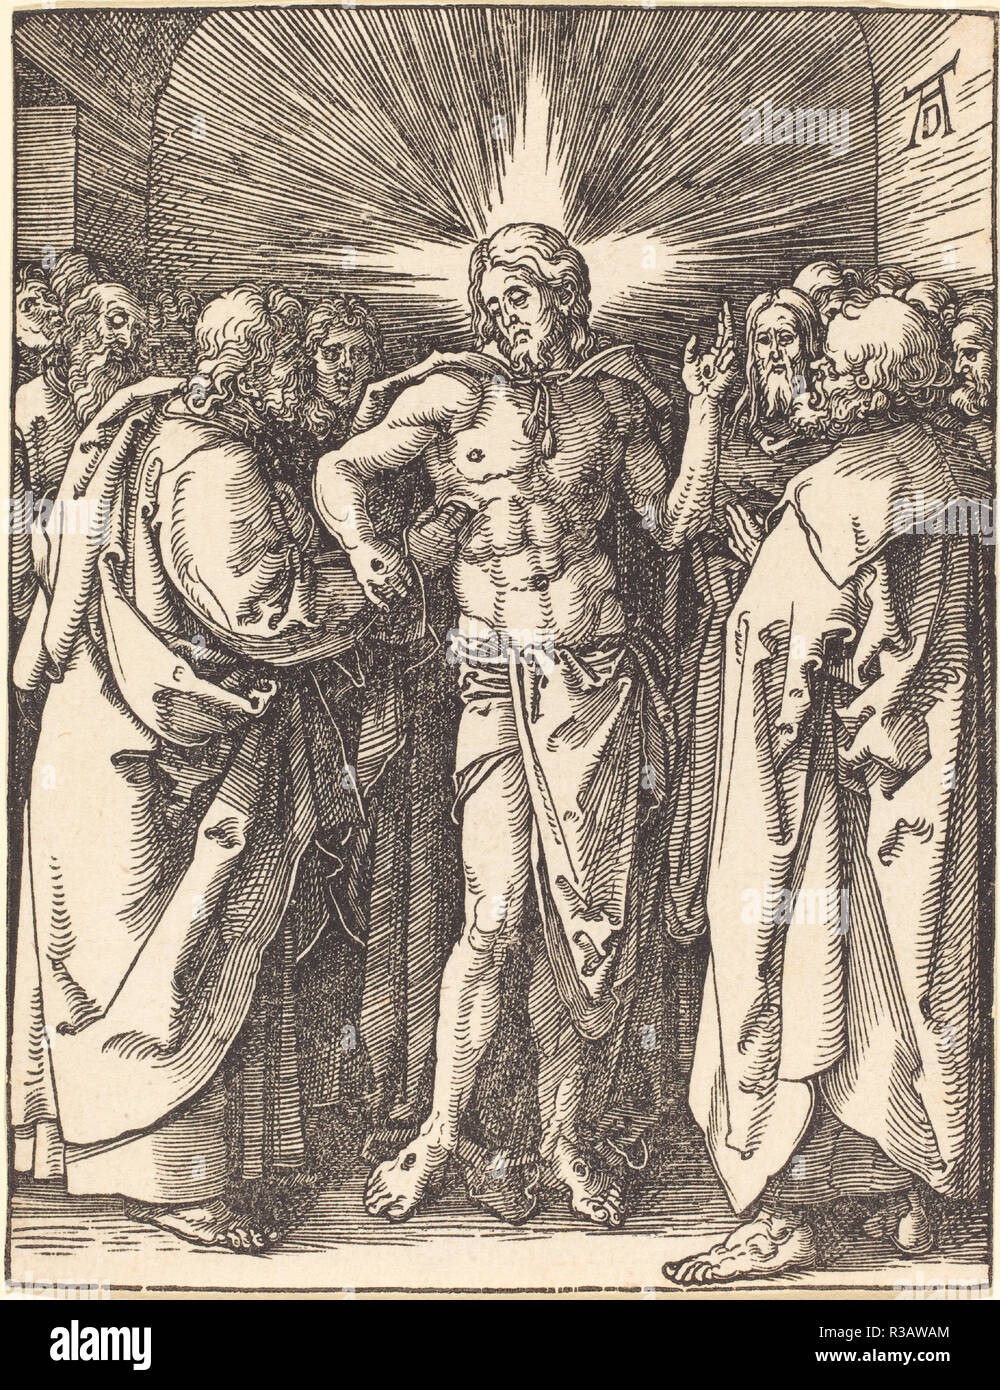 Doubting Thomas. Dated: probably c. 1509/1510. Dimensions: sheet (trimmed to image): 12.7 x 9.7 cm (5 x 3 13/16 in.). Medium: woodcut. Museum: National Gallery of Art, Washington DC. Author: Dürer, Albrecht. ALBRECHT DUERER. Stock Photo